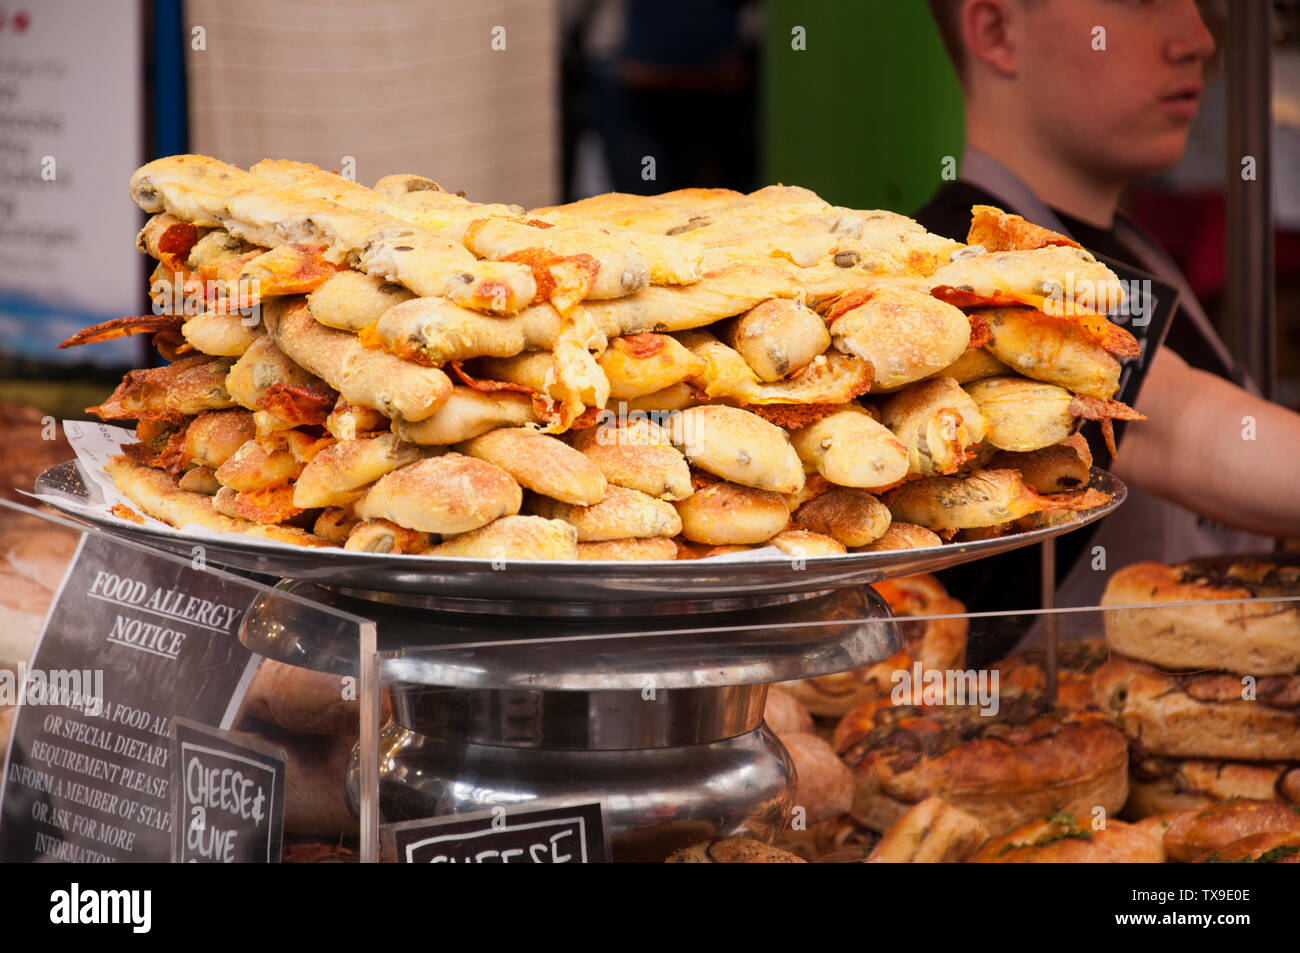 Cheese bread stick for sale on market stall in Borough Market, London, England Stock Photo